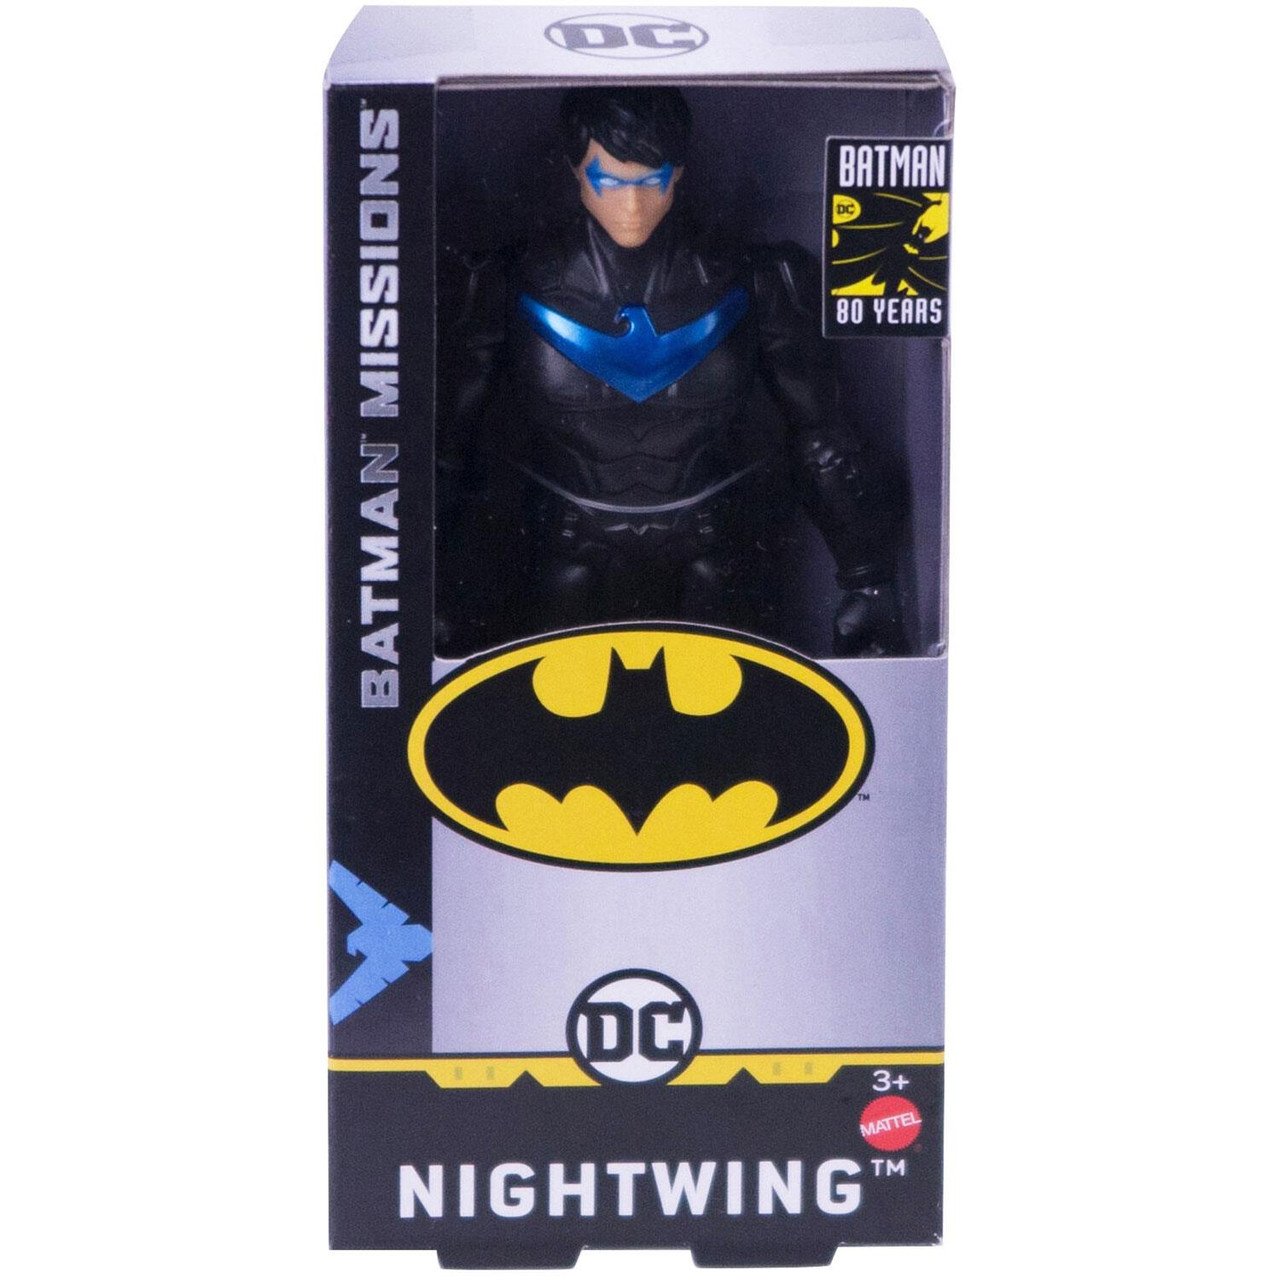 Batman Missions 6-inch NIGHTWING Figure - Bubble-n-Squeak Toys